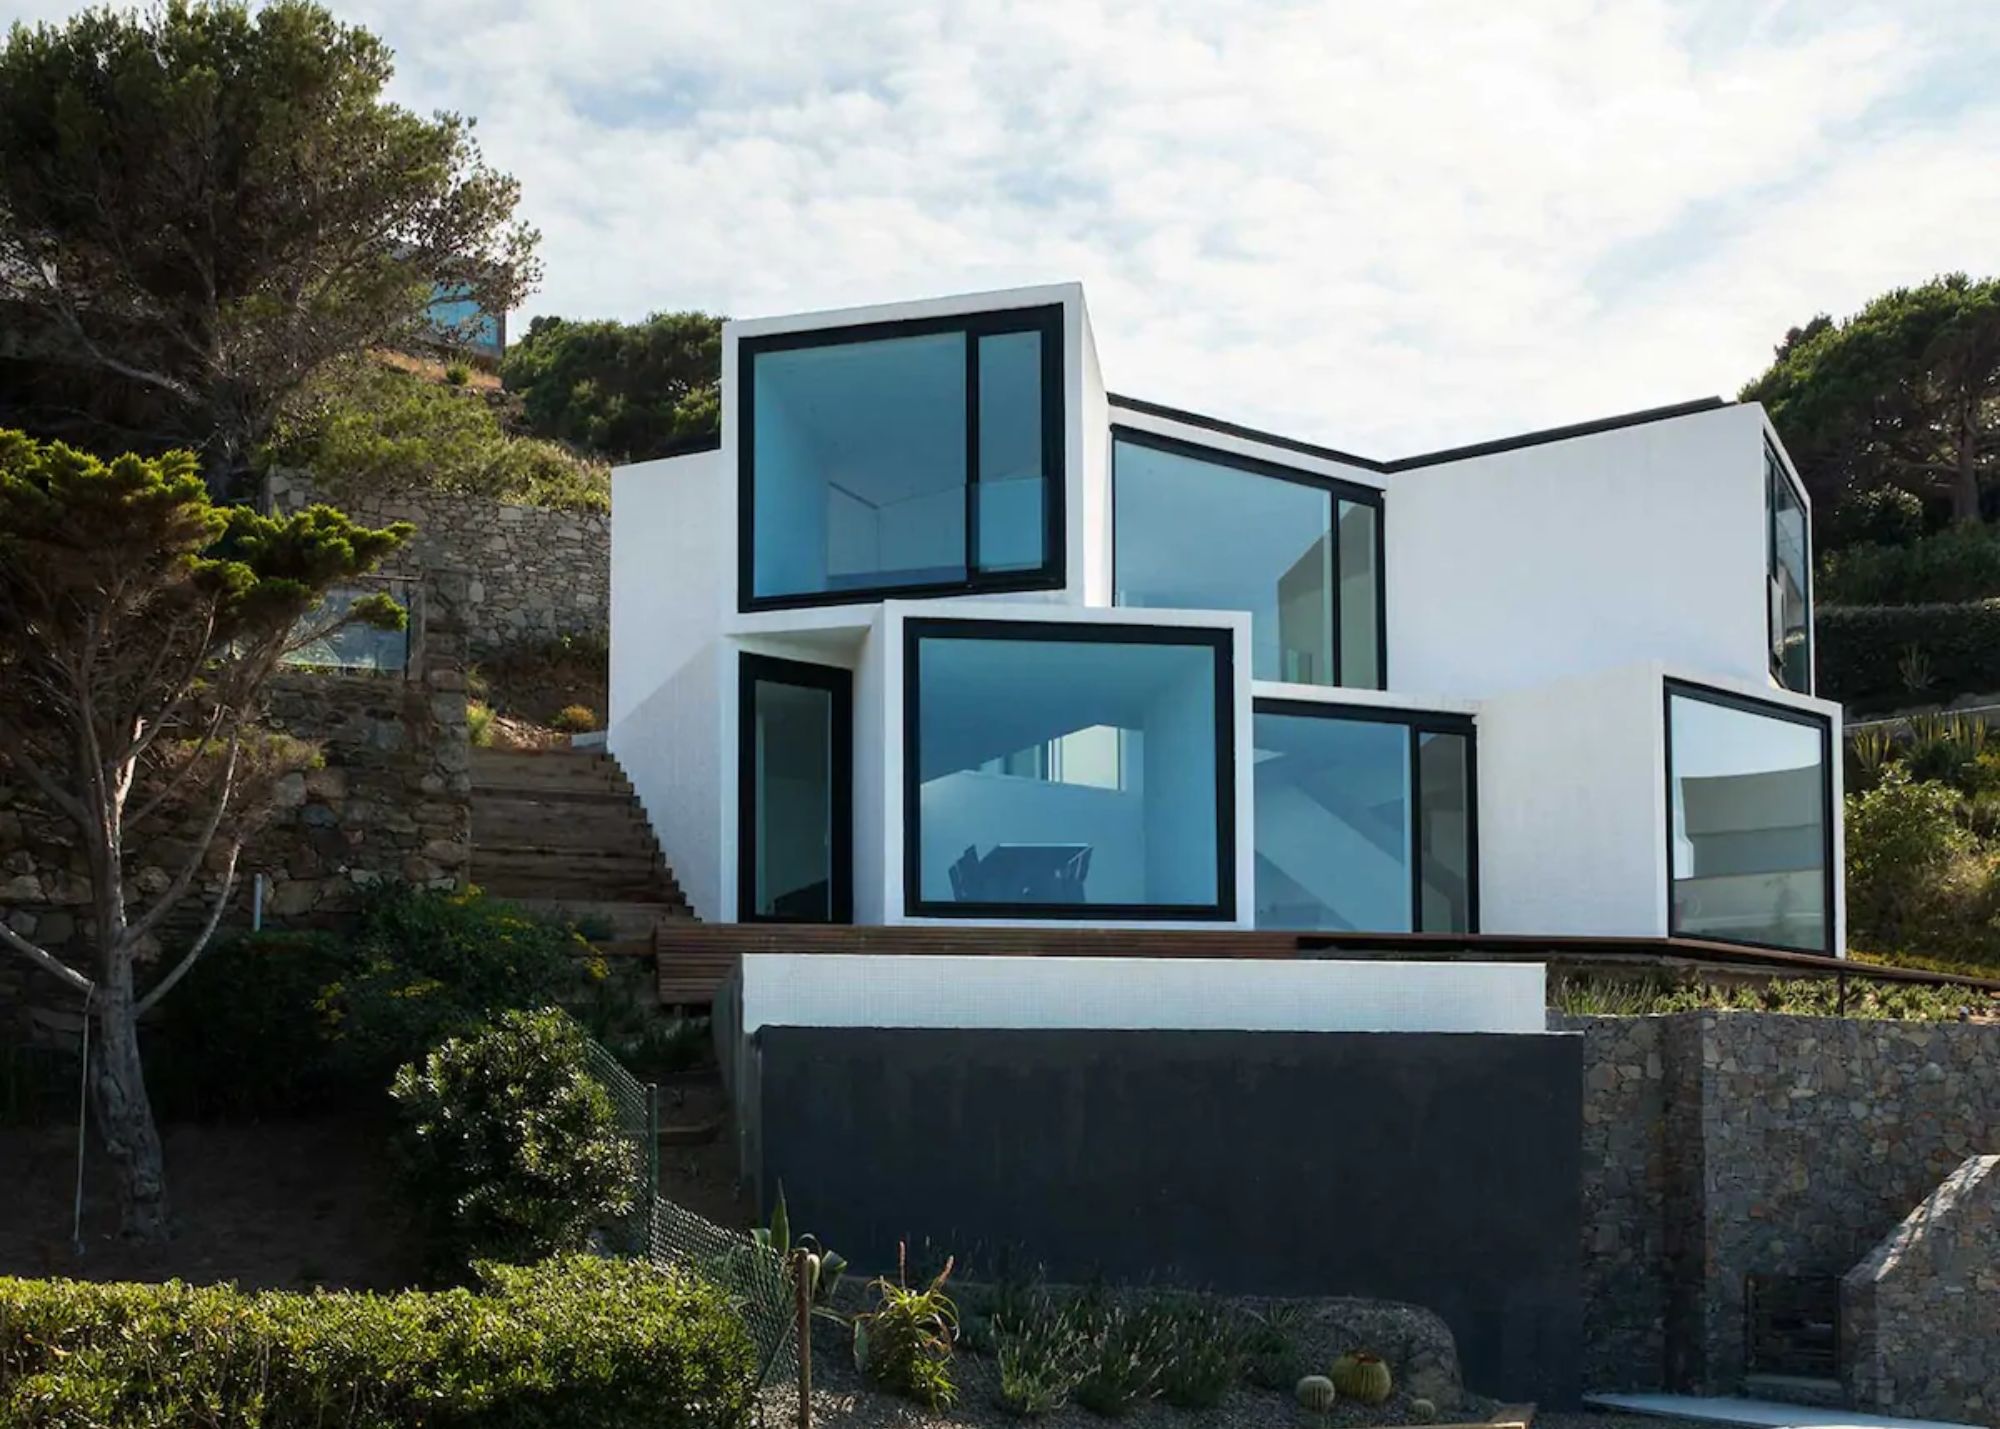 The sunflower house is painted in white color and design in a challenging clifftop location